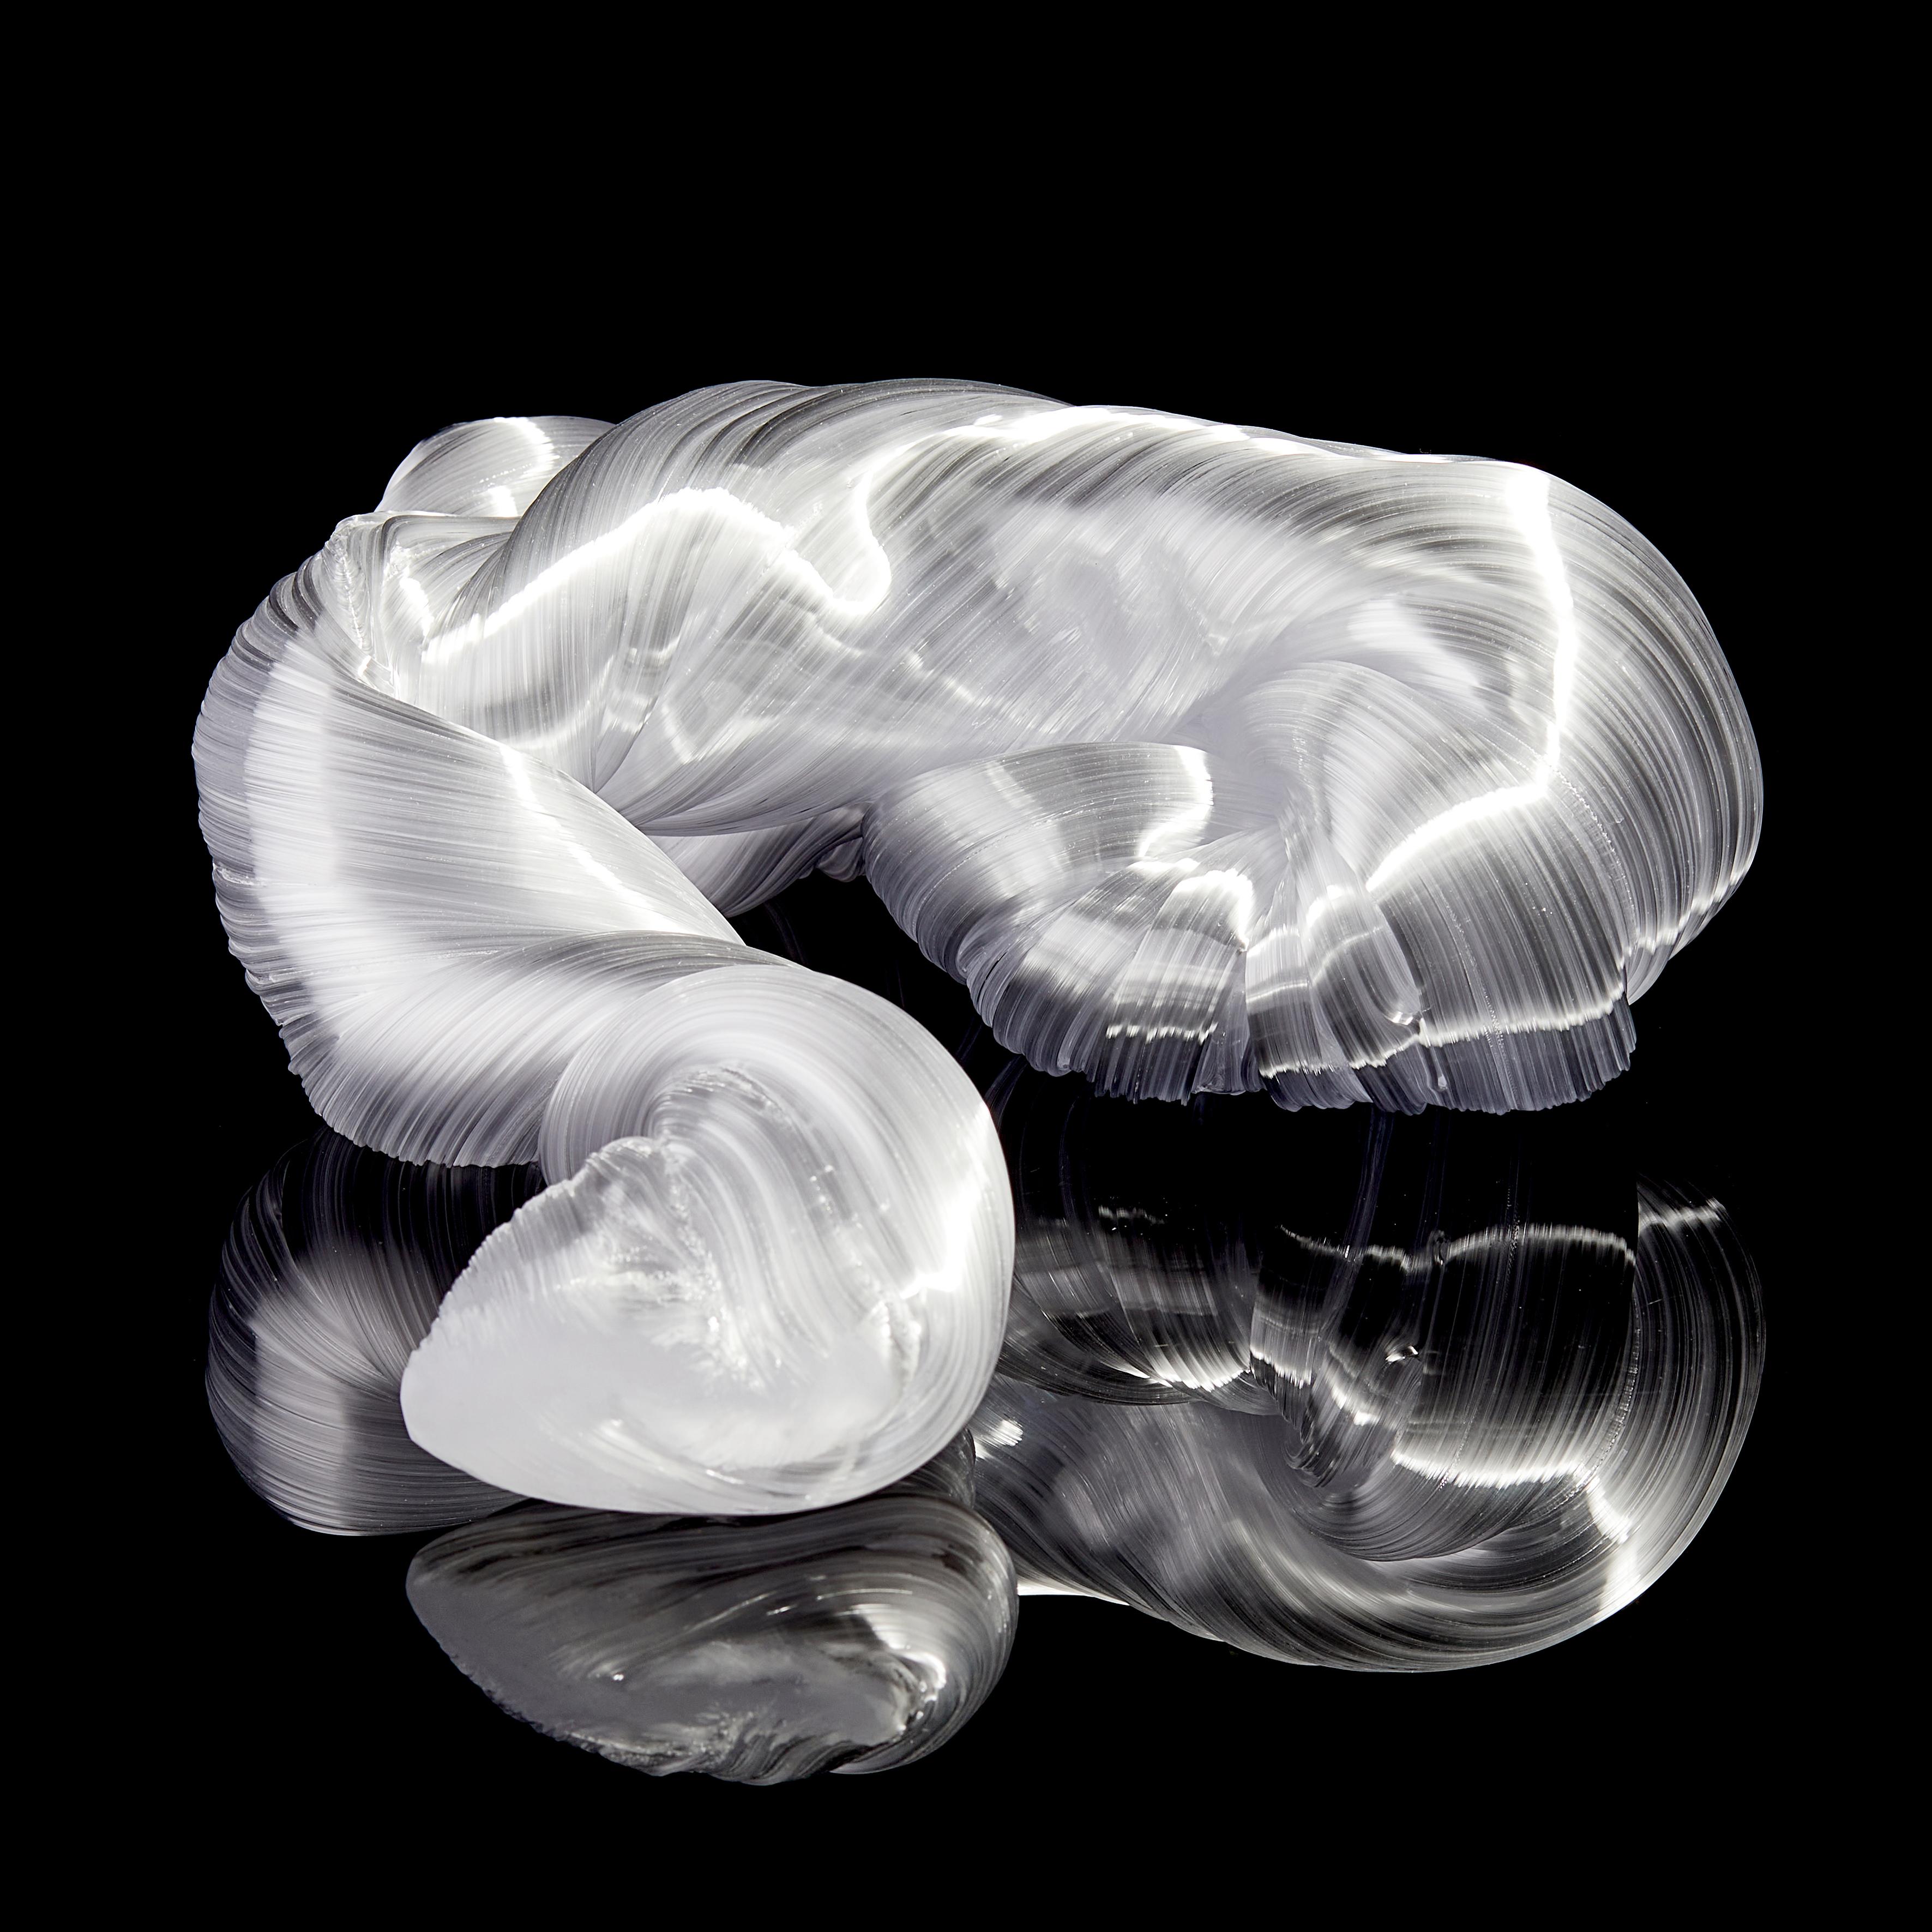 Danish Folded Rock in White, a Unique White Glass Sculpture by Maria Bang Espersen